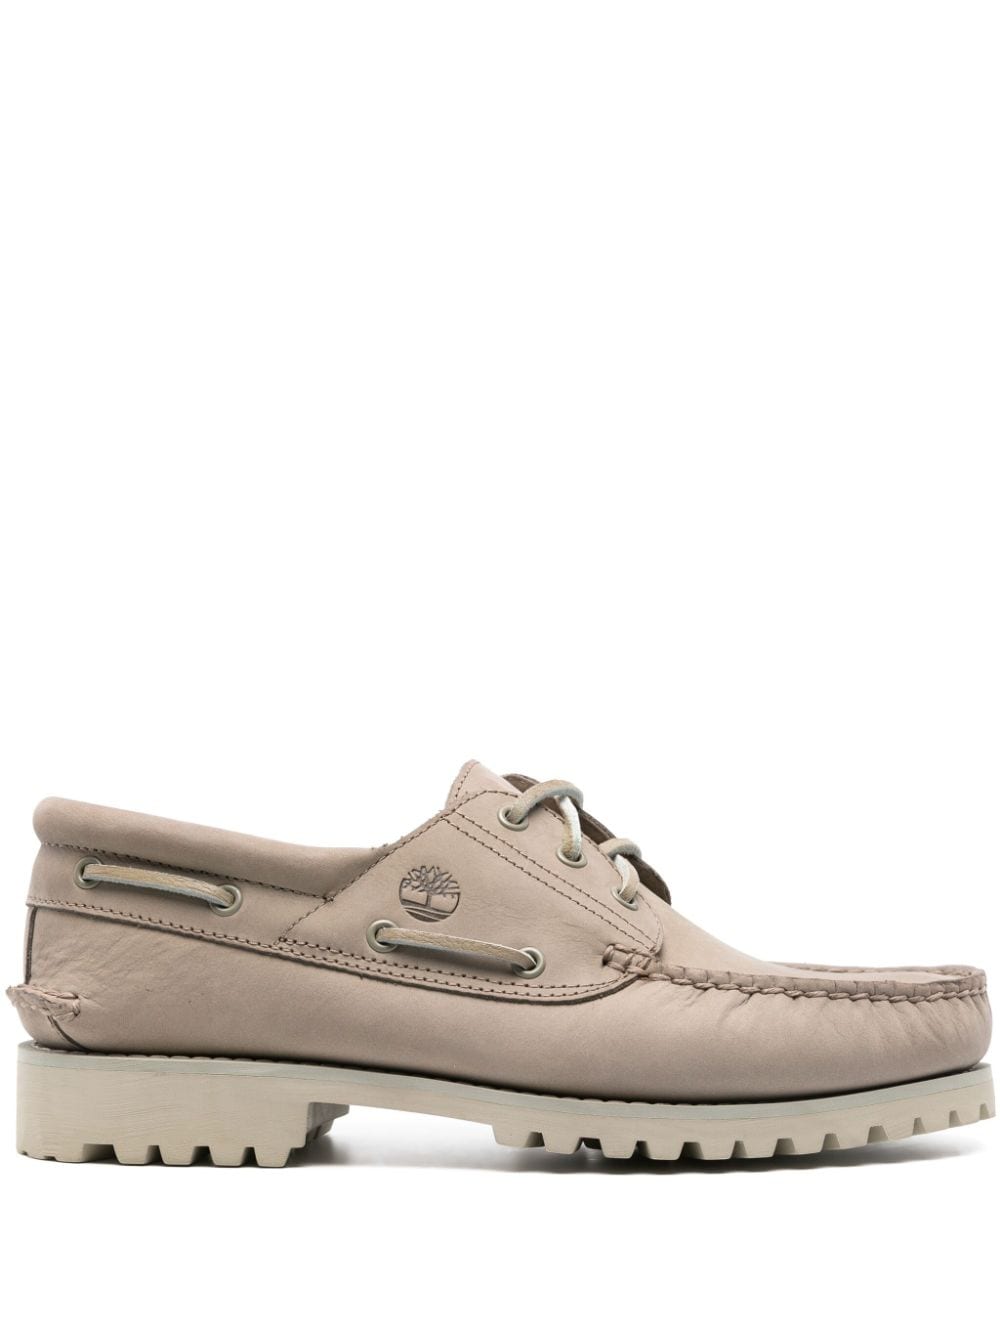 Timberland Authentic 3-Eye suede boat shoes - Grey von Timberland